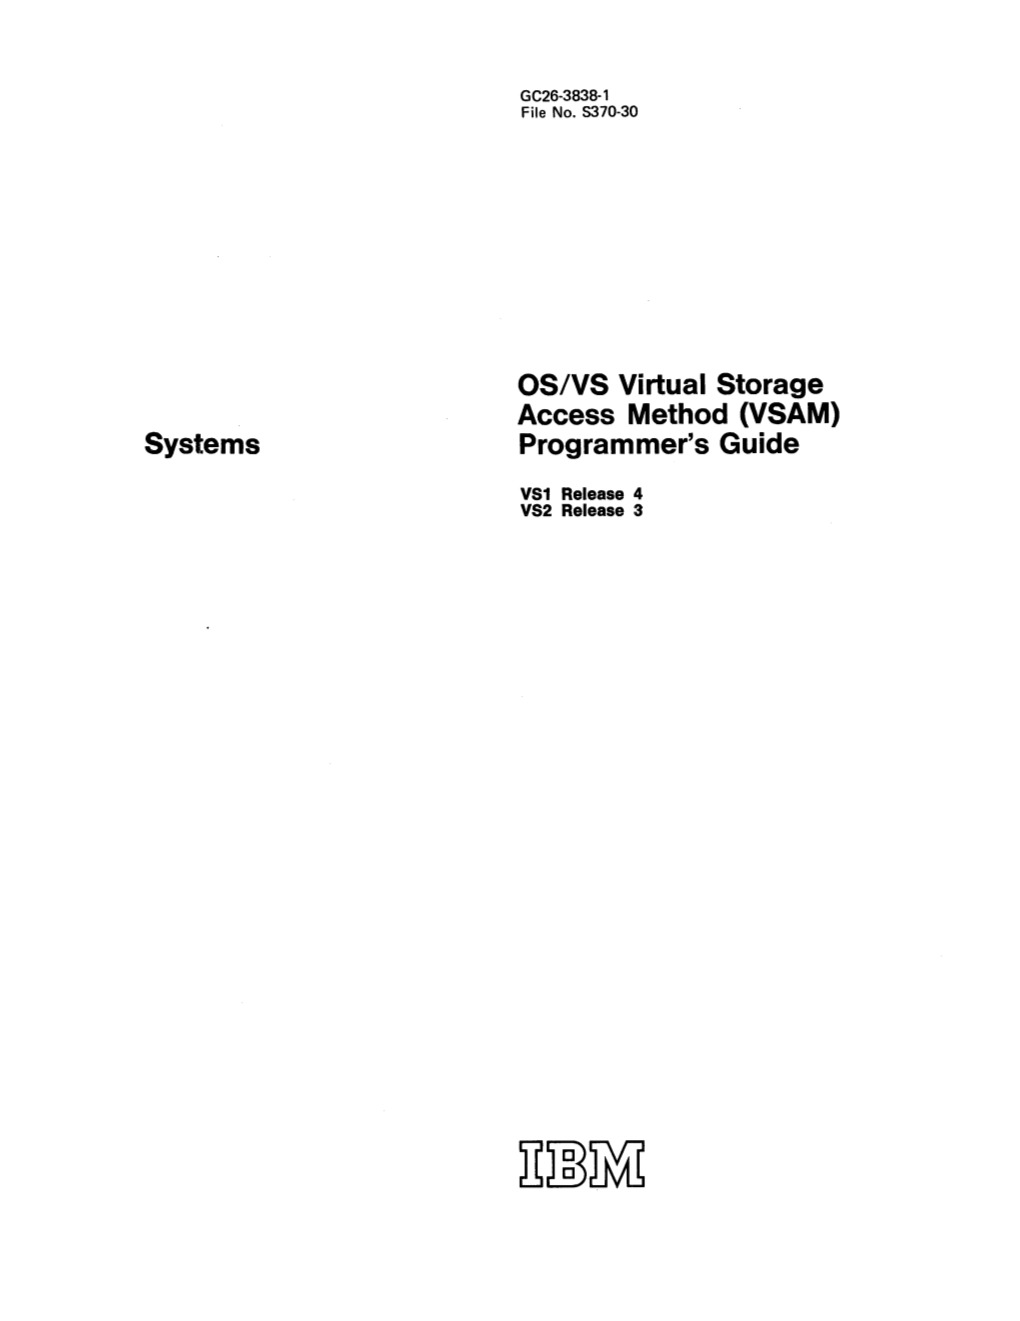 Systems OS/VS Virtual Storage Access Method (VSAM) Programmer's Guide